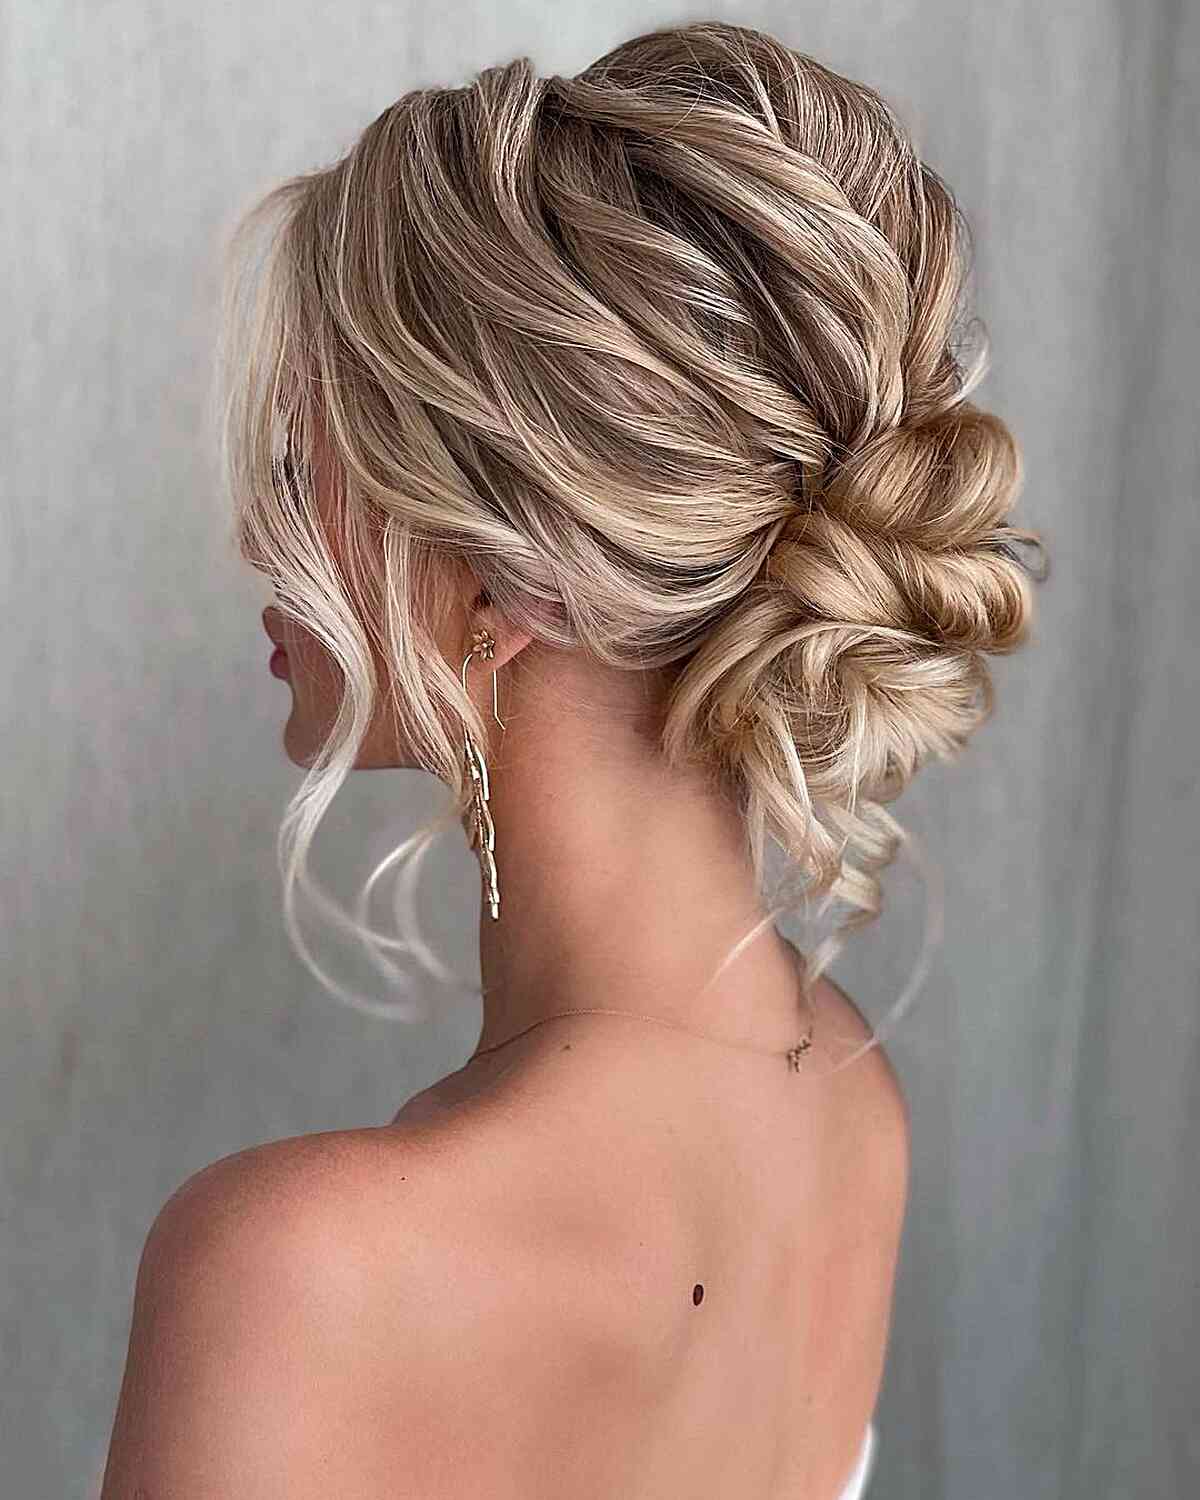 How to Do Updos For Bobs and Short Hair Cuts | POPSUGAR Beauty UK